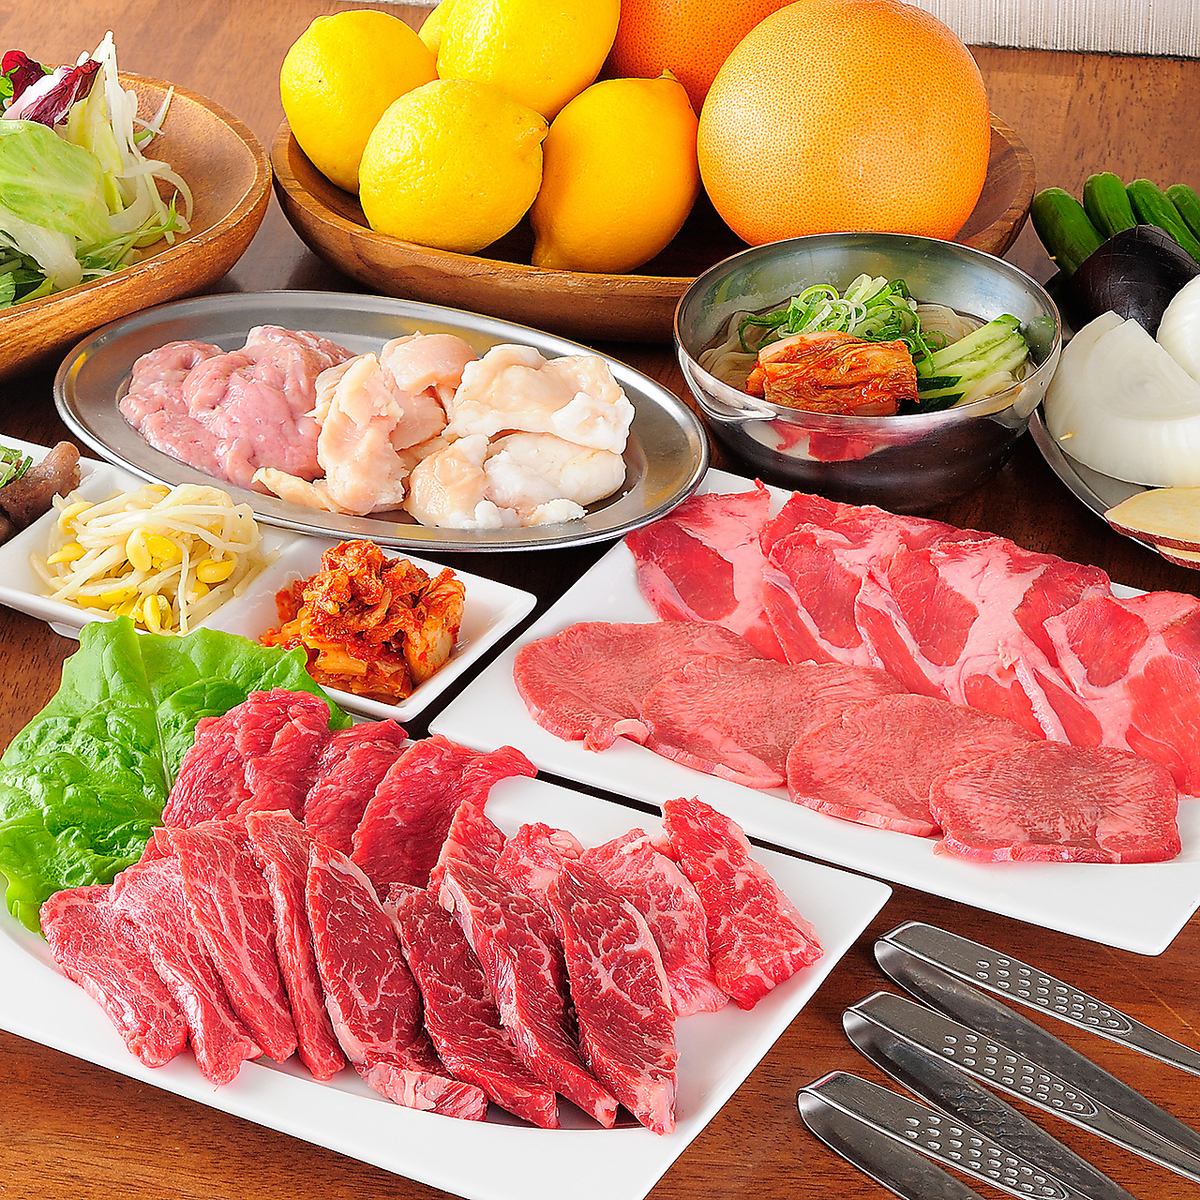 Enjoy authentic charcoal-grilled fresh meat directly managed by a butcher shop♪ Now accepting banquets!